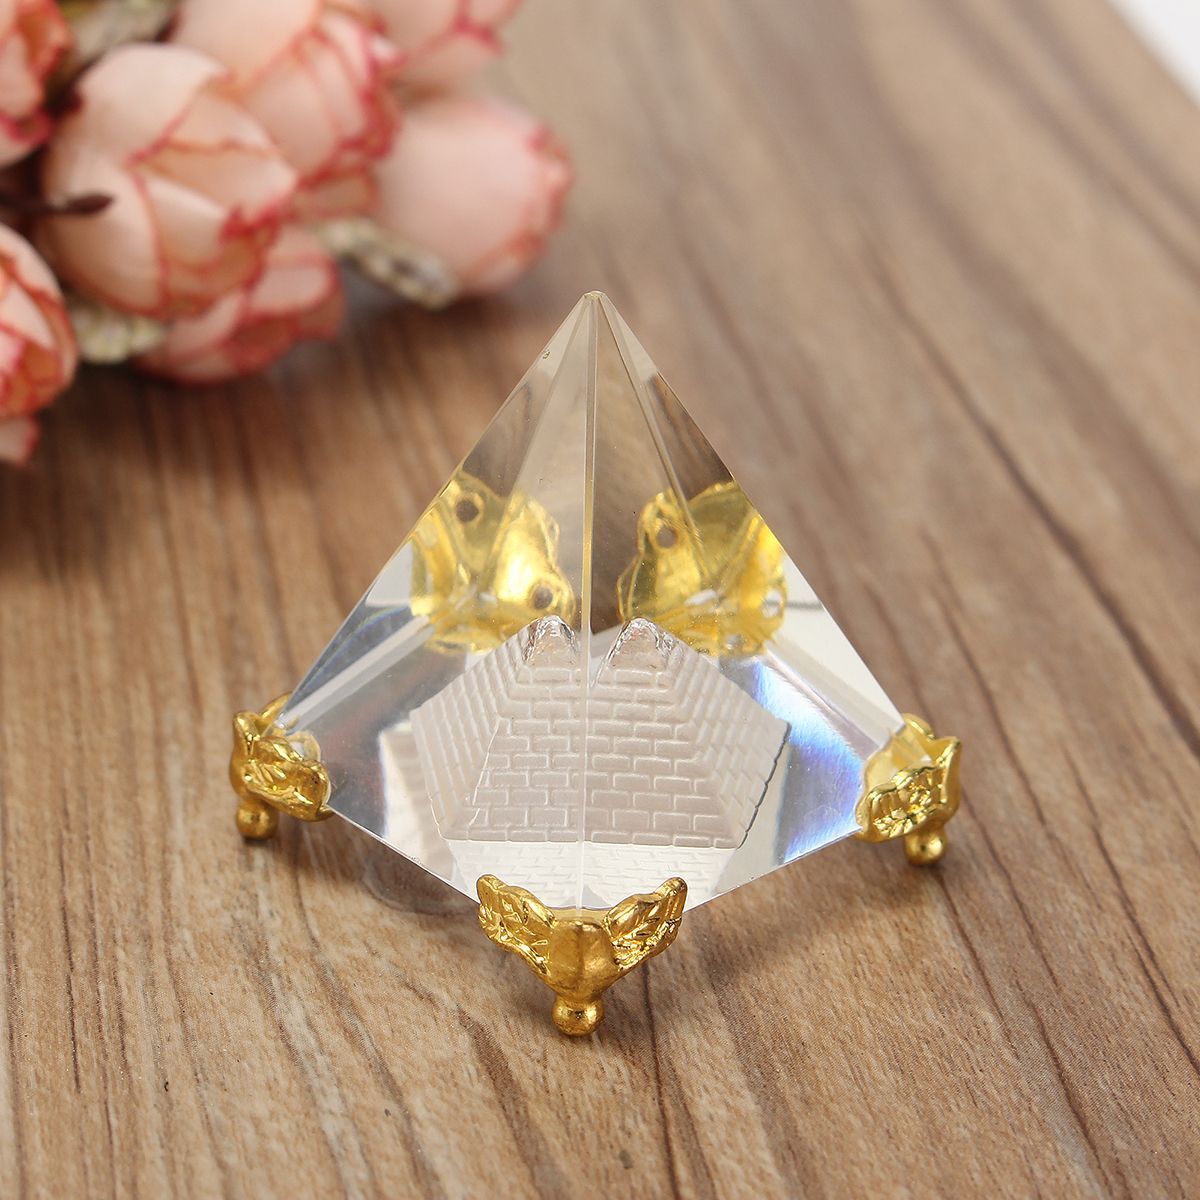 Small-Feng-Shui-Egypt-Egyptian-Crystal-Clear-Pyramid-REIKI-Healing-Prizms-Room-Decorations-1581145